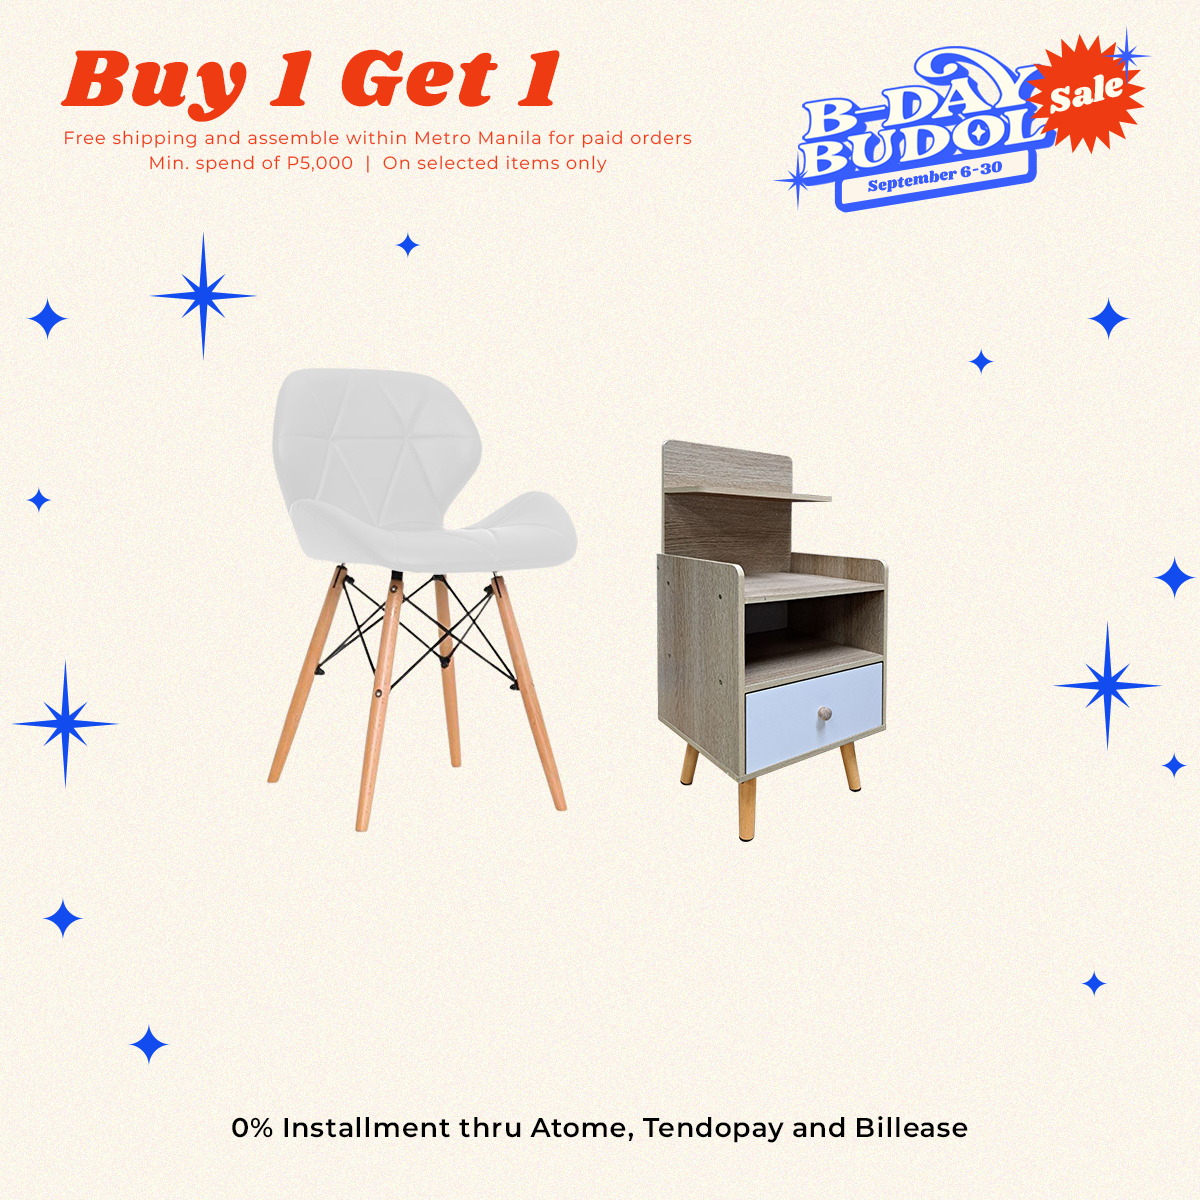 BUY 1 GET FREE: Butterfly Leather Chair + Zion Bedside Table